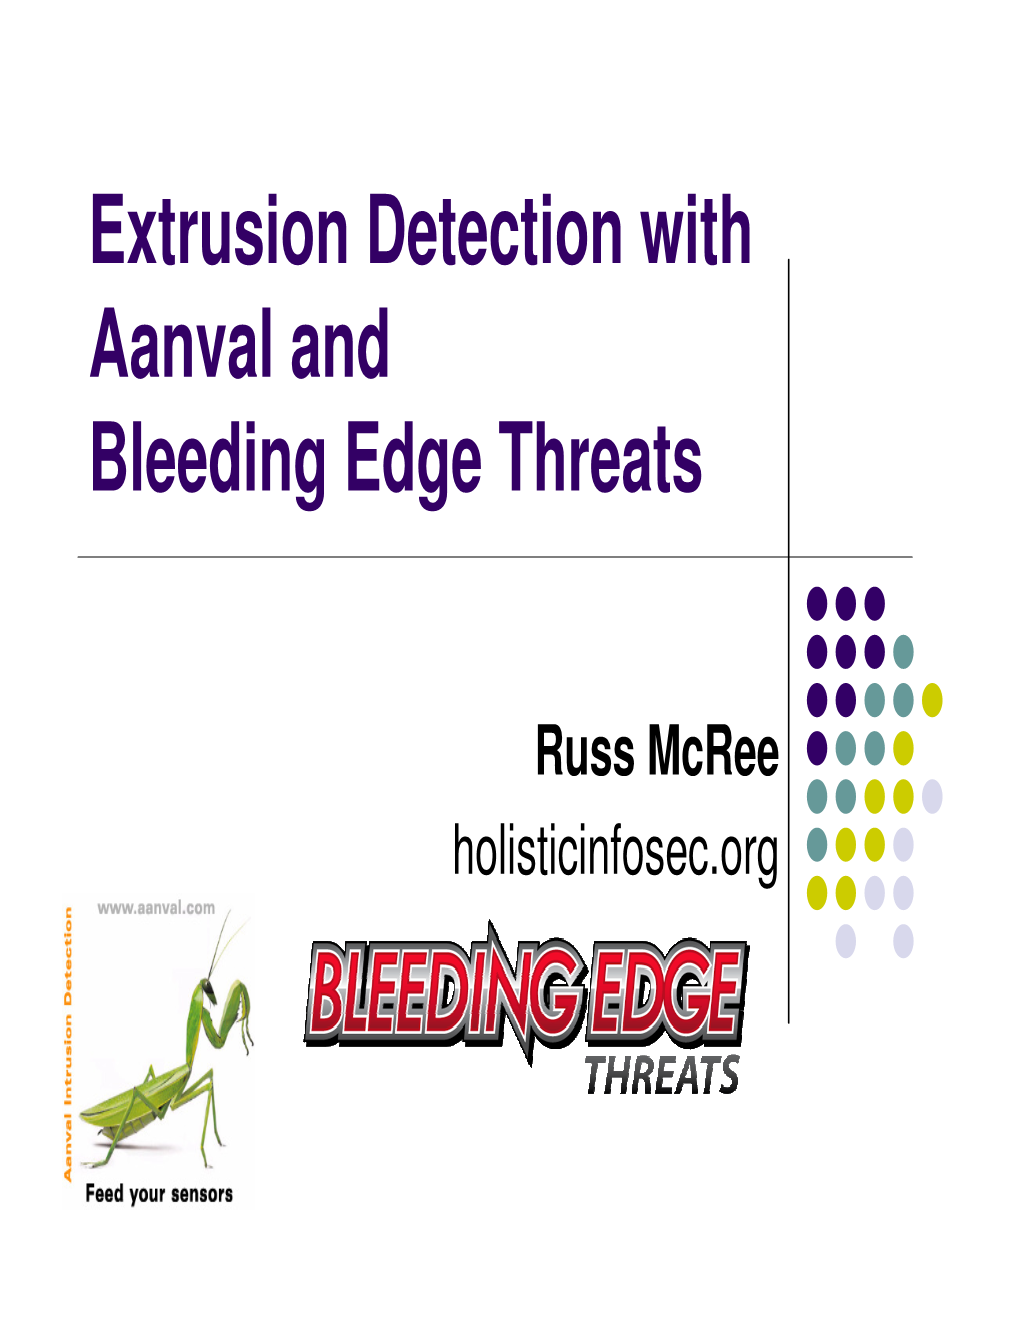 Extrusion Detection with Aanval and Bleeding Edge Threats